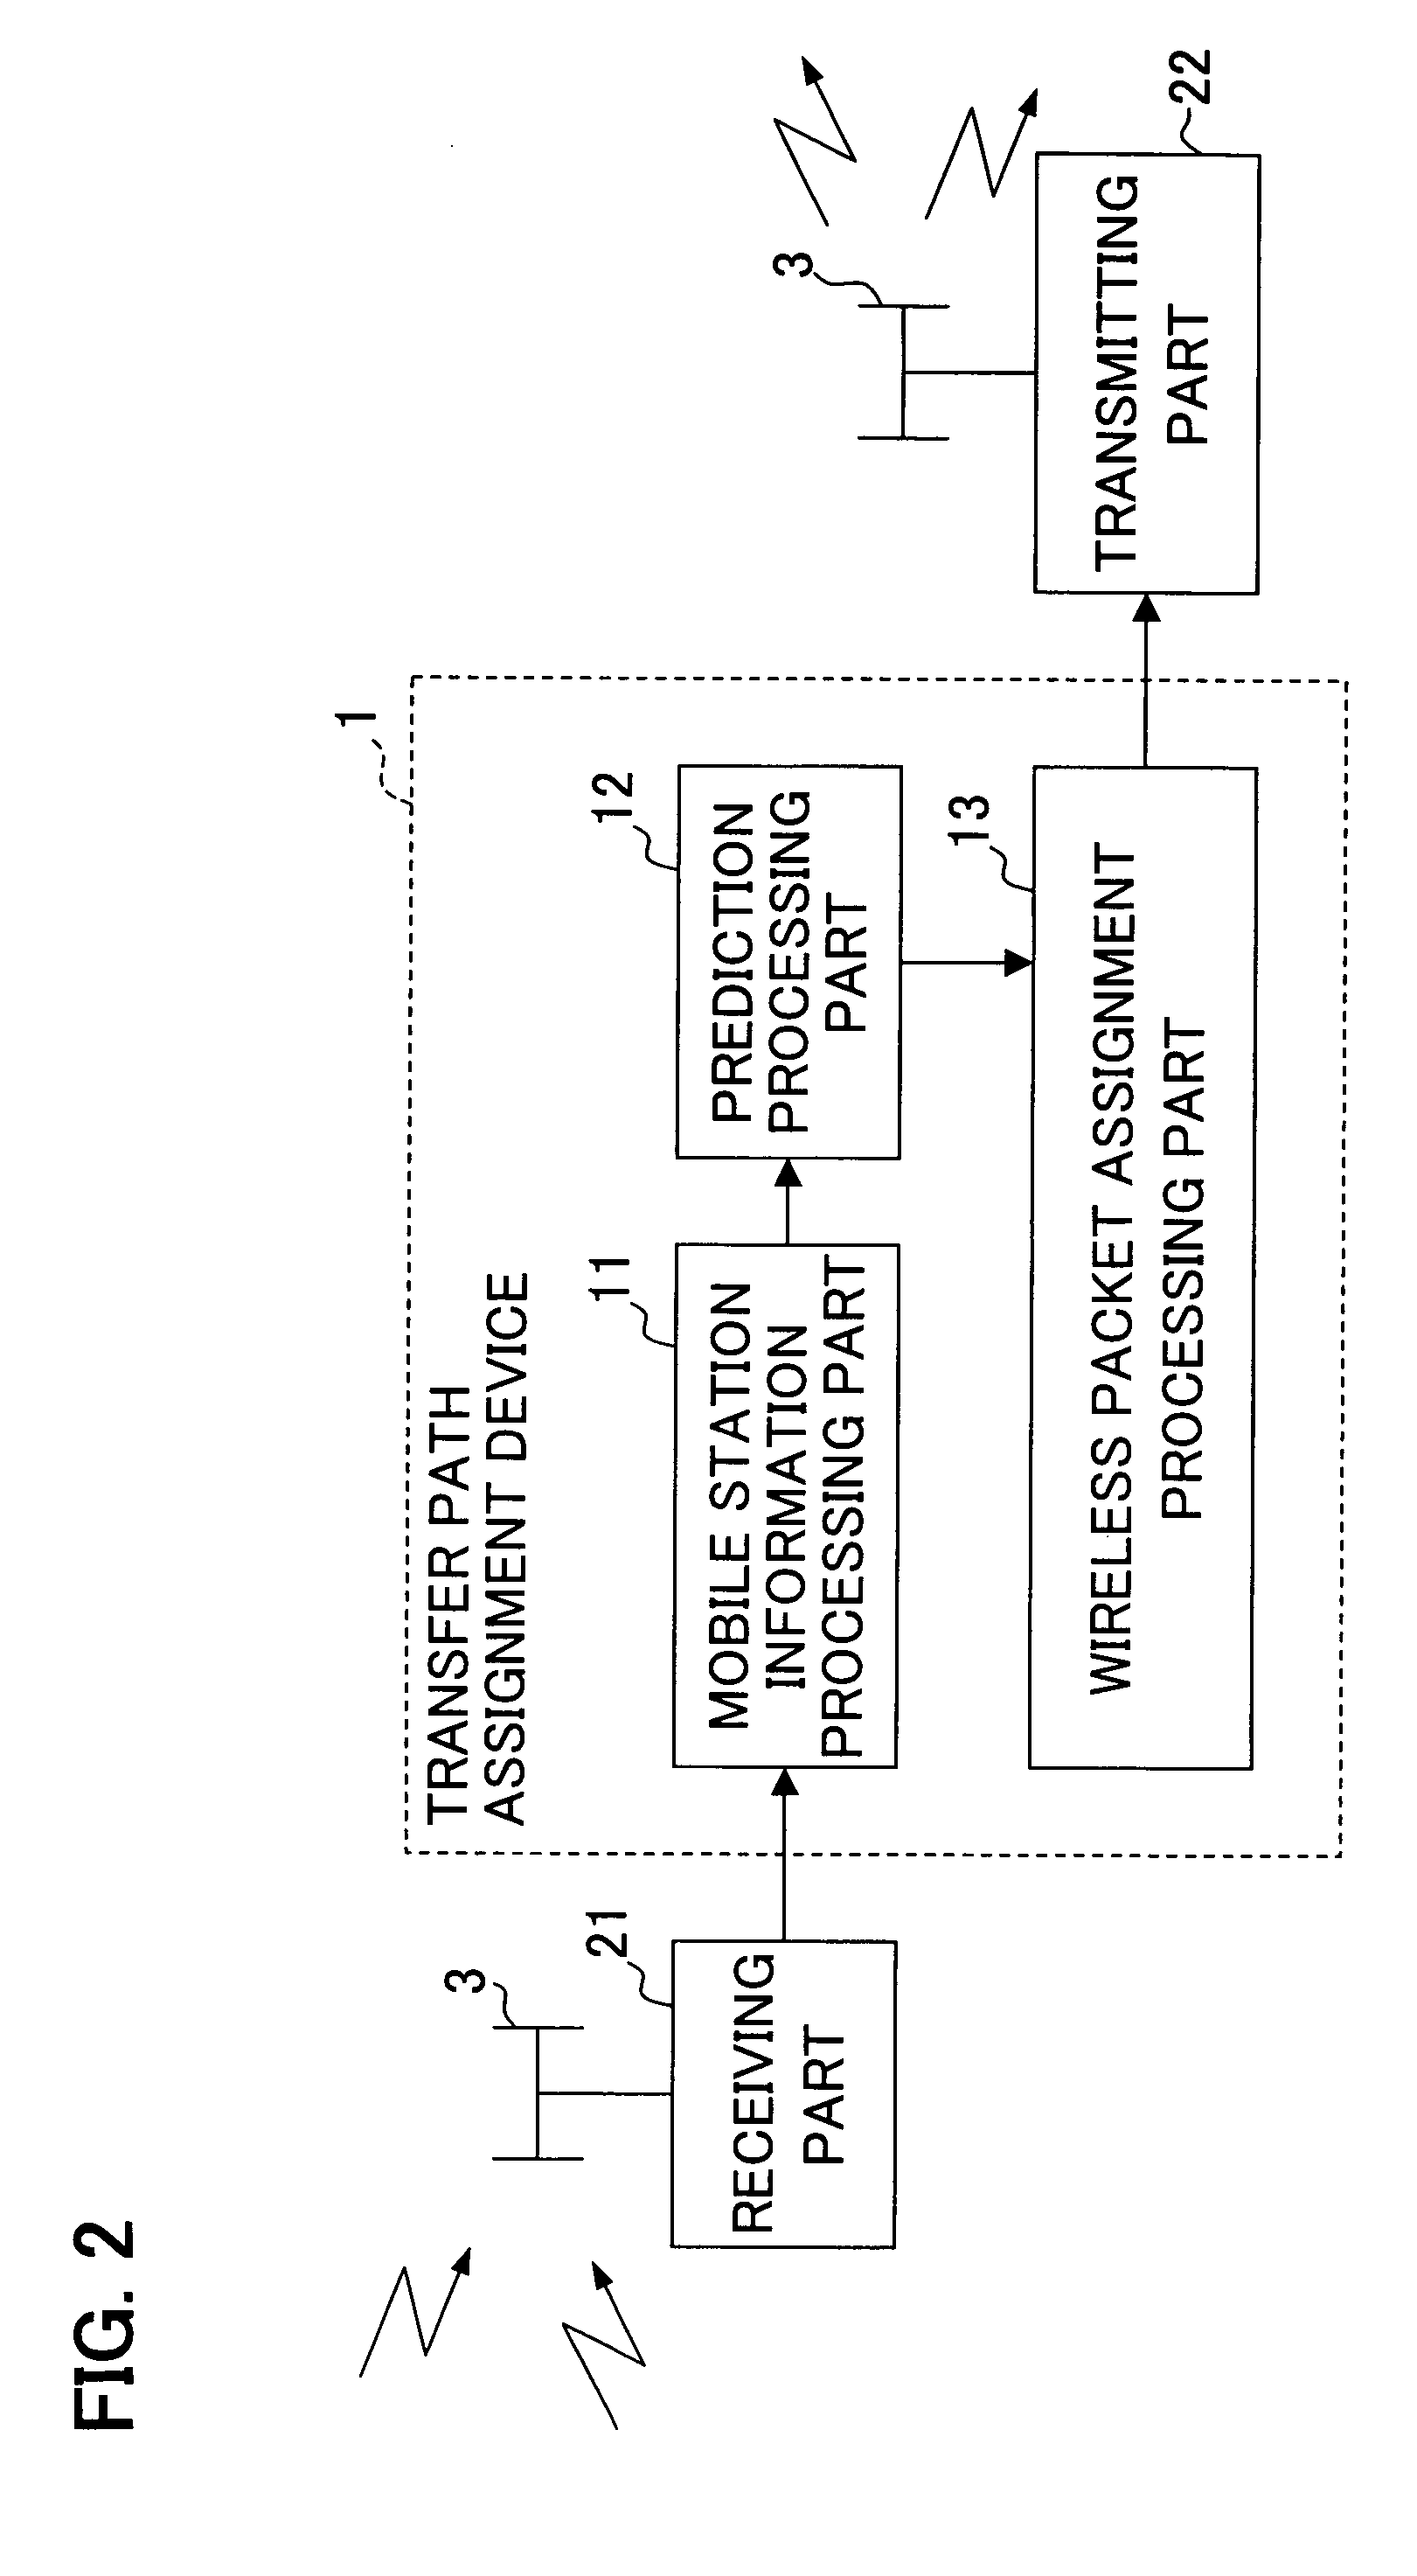 Transmitting device for assigning data for receiving device selected from plurality of receiving devices to shared channel